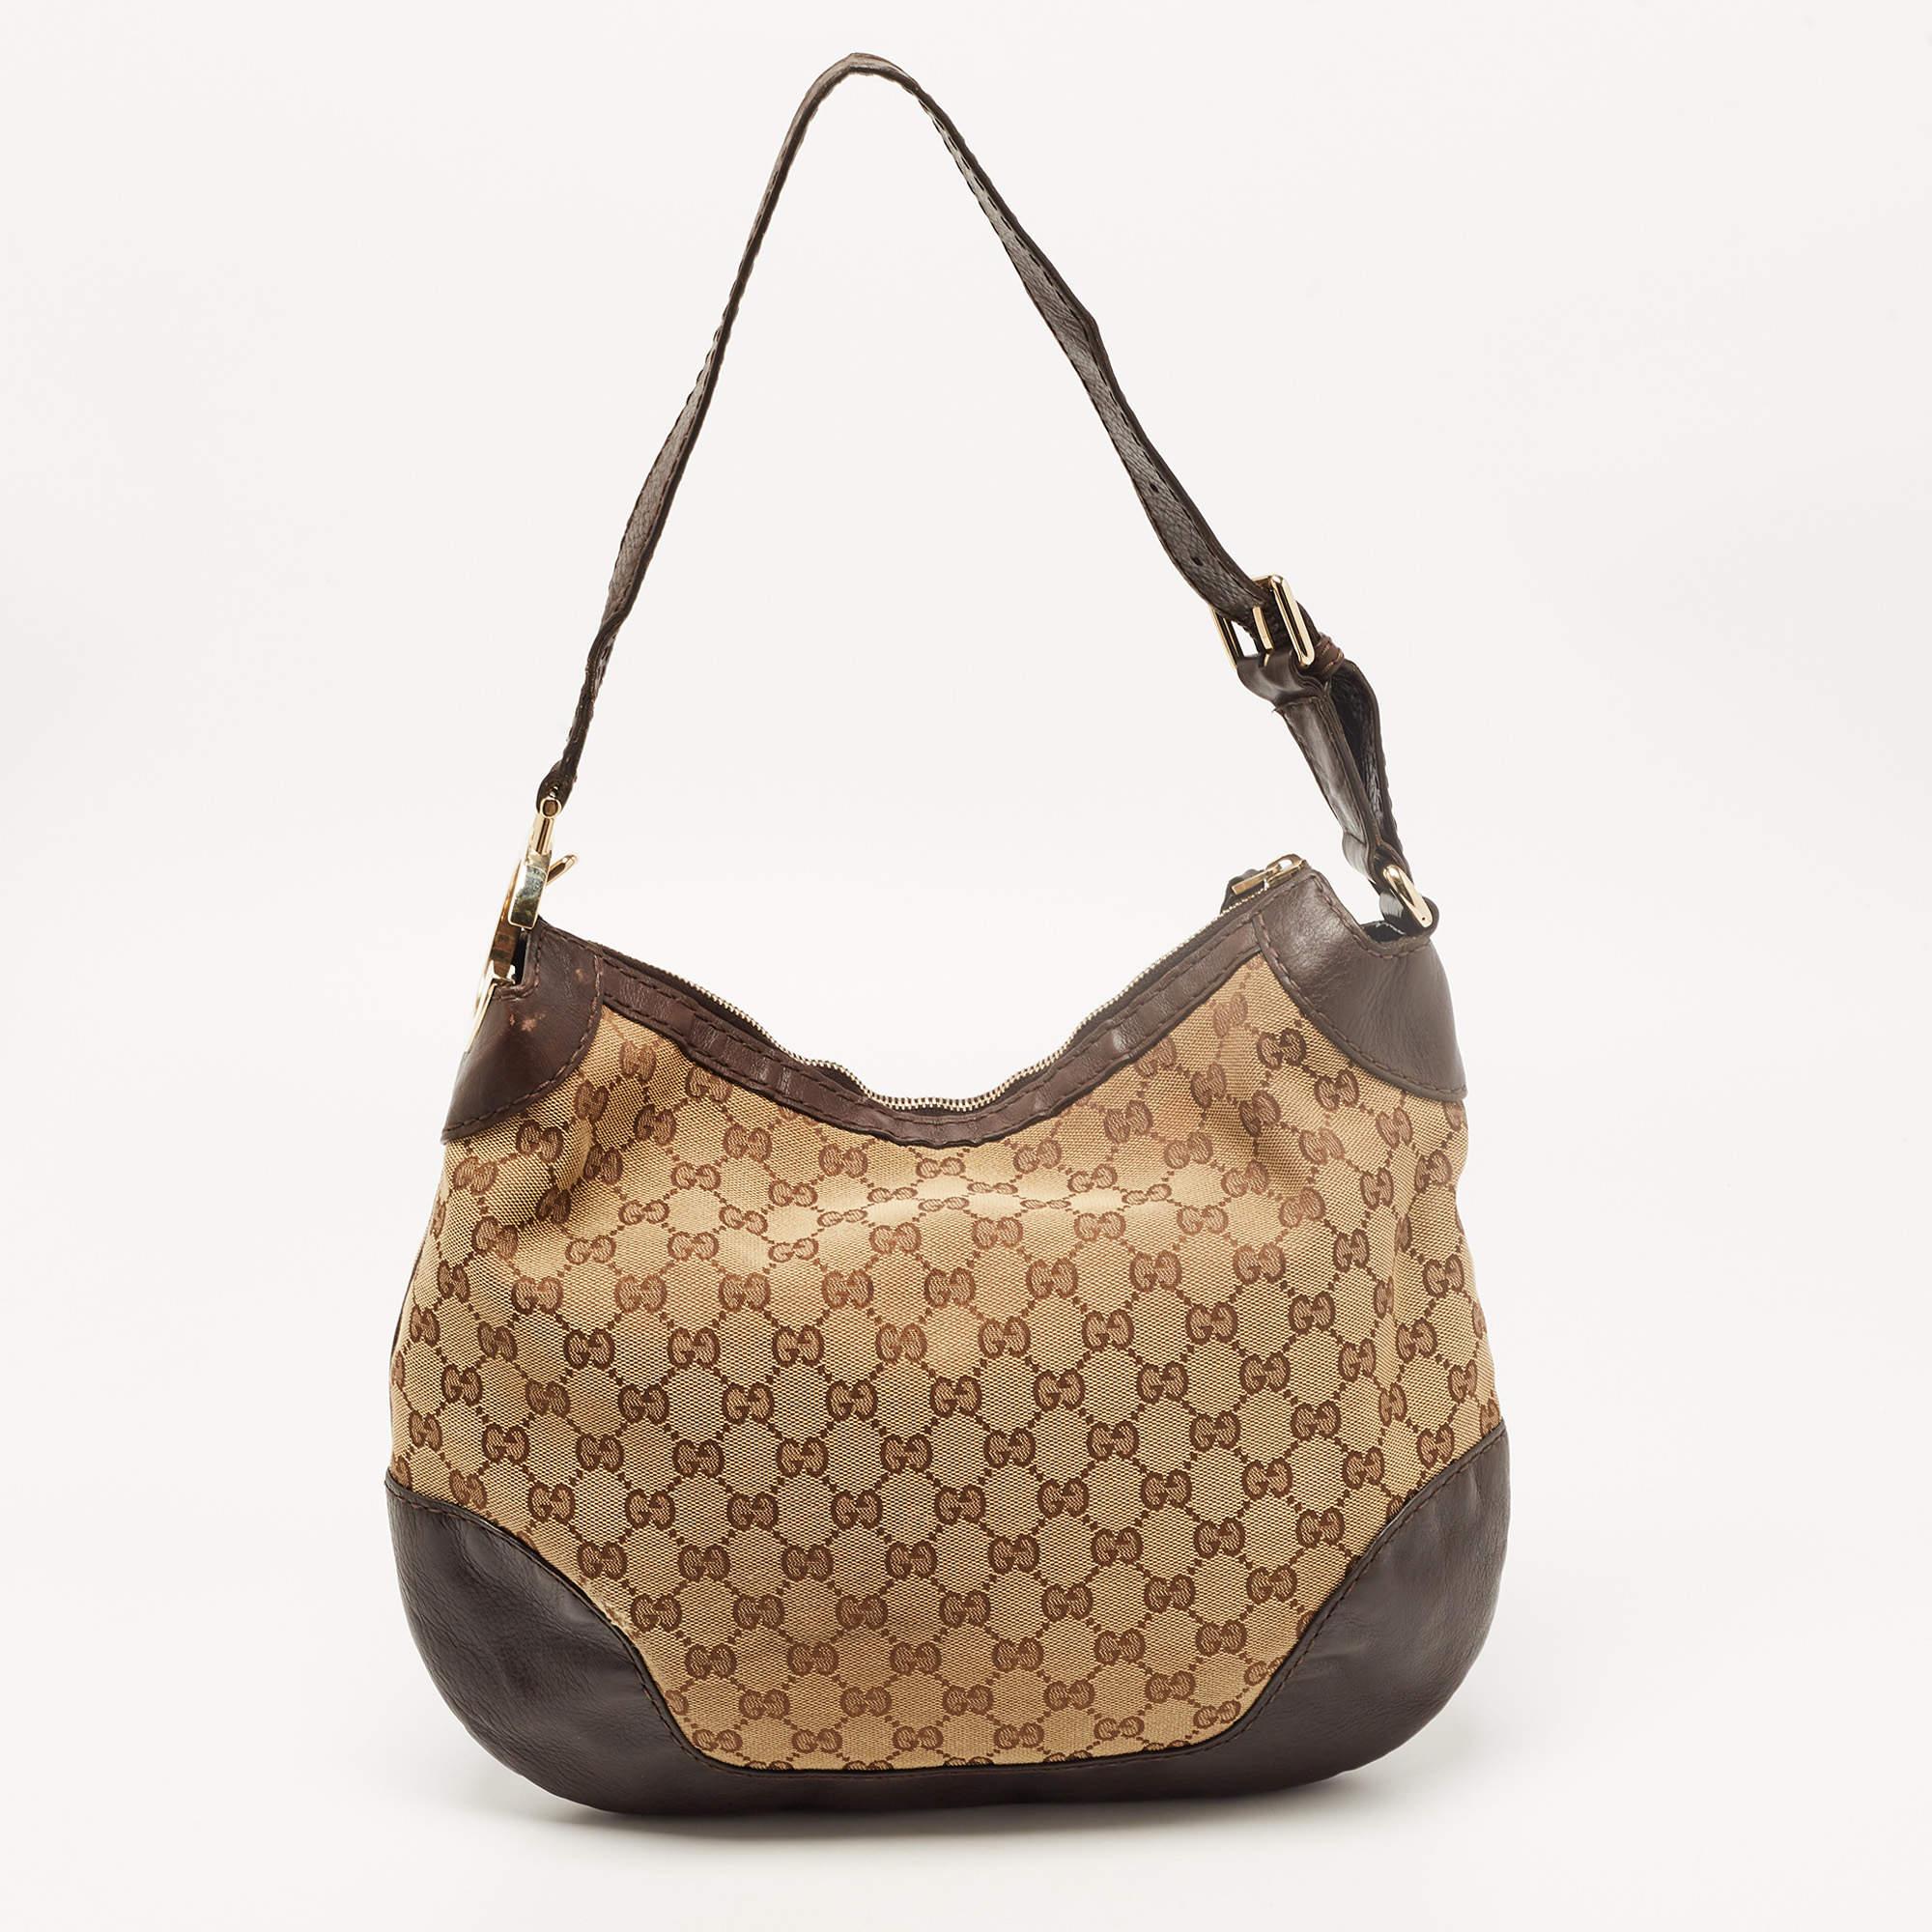 This Charlotte hobo from the house of Gucci will be your perfect everyday accessory. Crafted from classic GG canvas, it features a leather handle. It is secured with a top zip closure that opens to a spacious interior that can easily hold all your